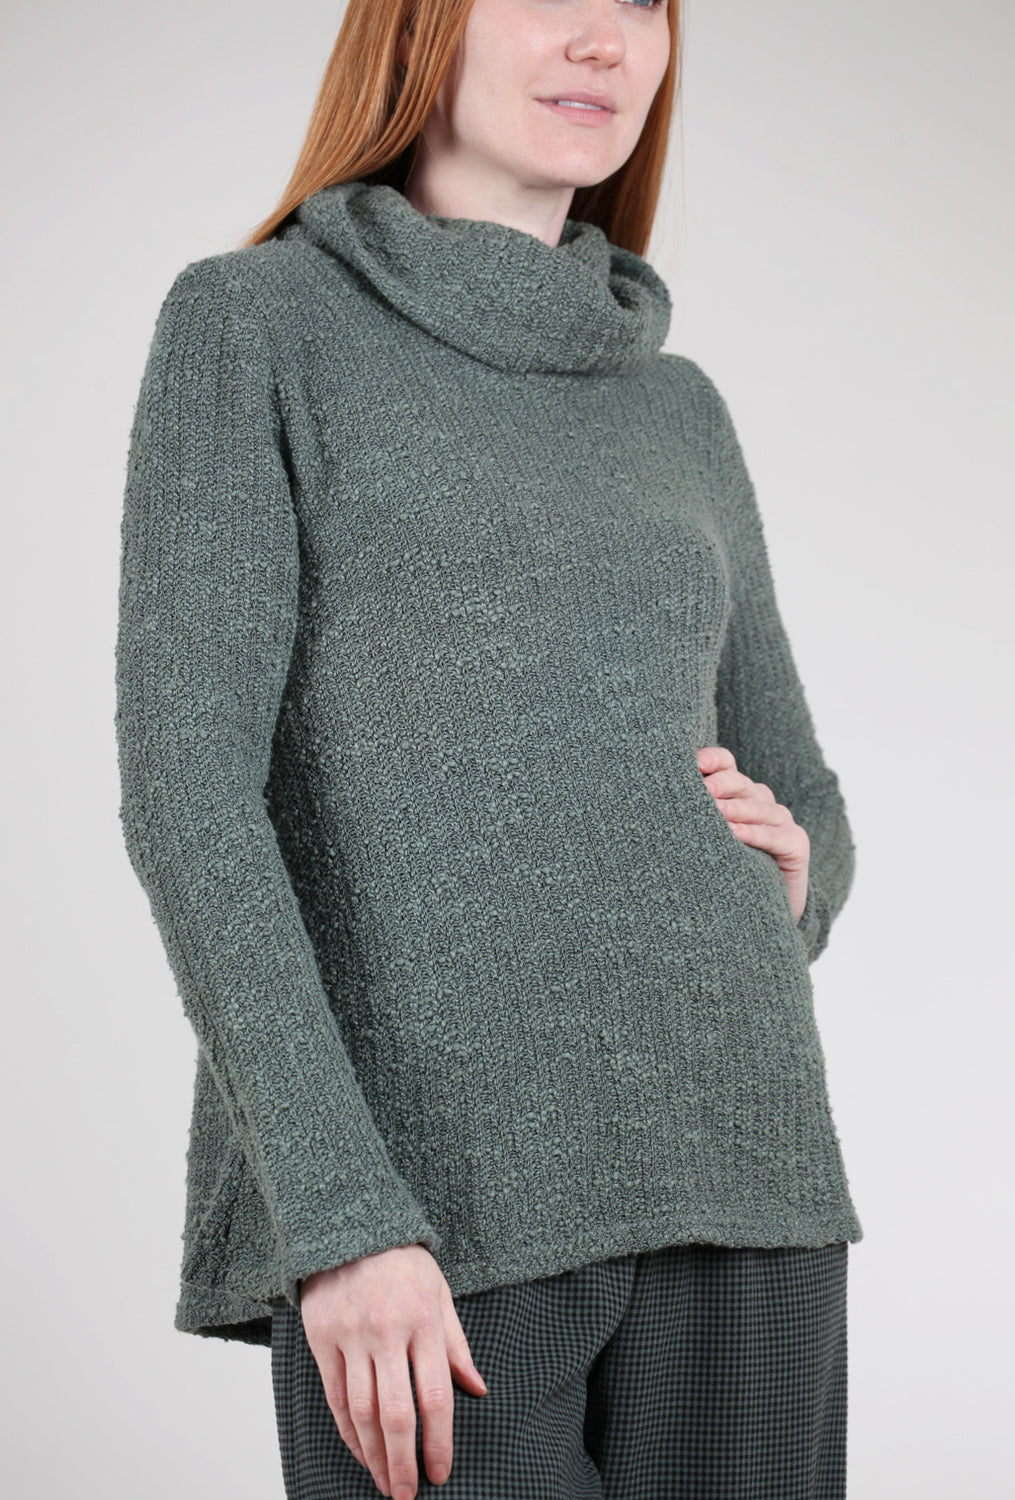 Nubby Knit Cowl Pullover, Myrtle